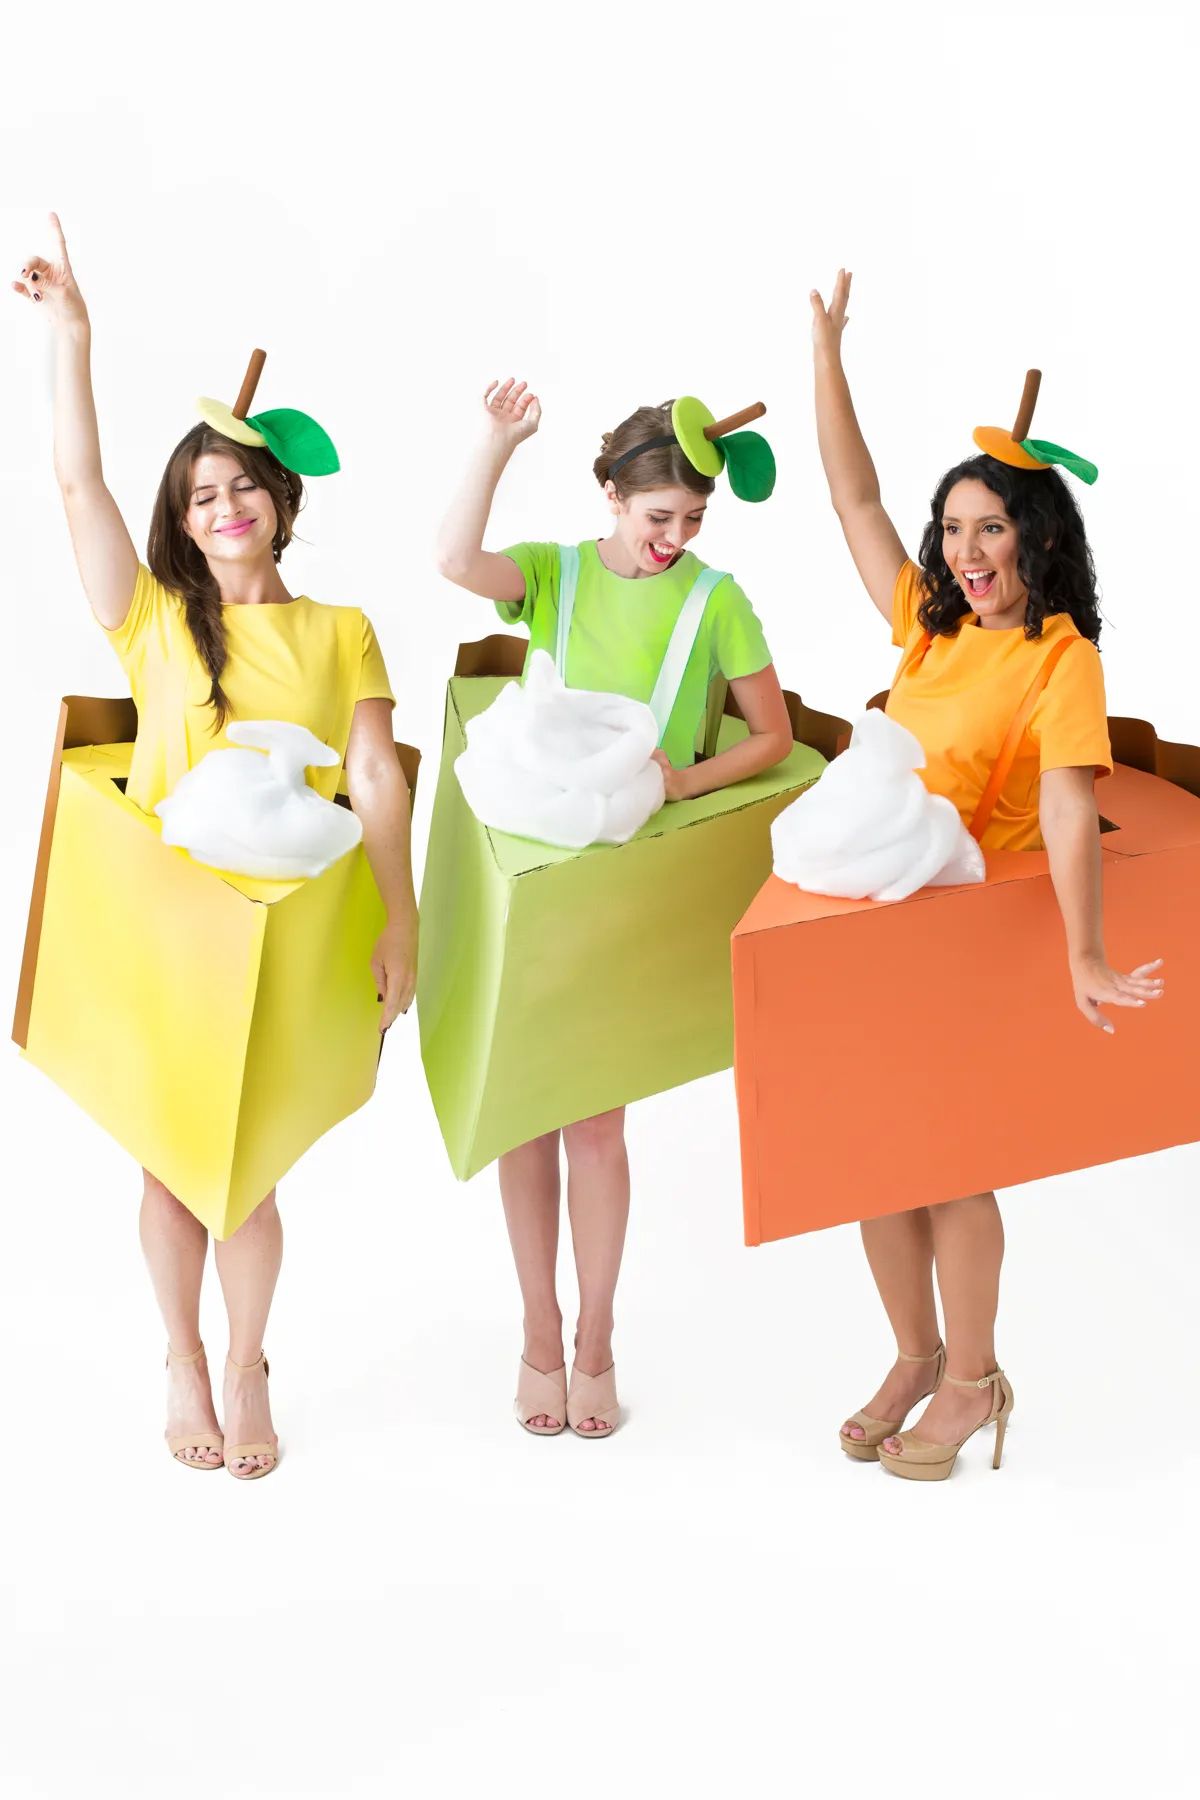 group halloween costumes for work